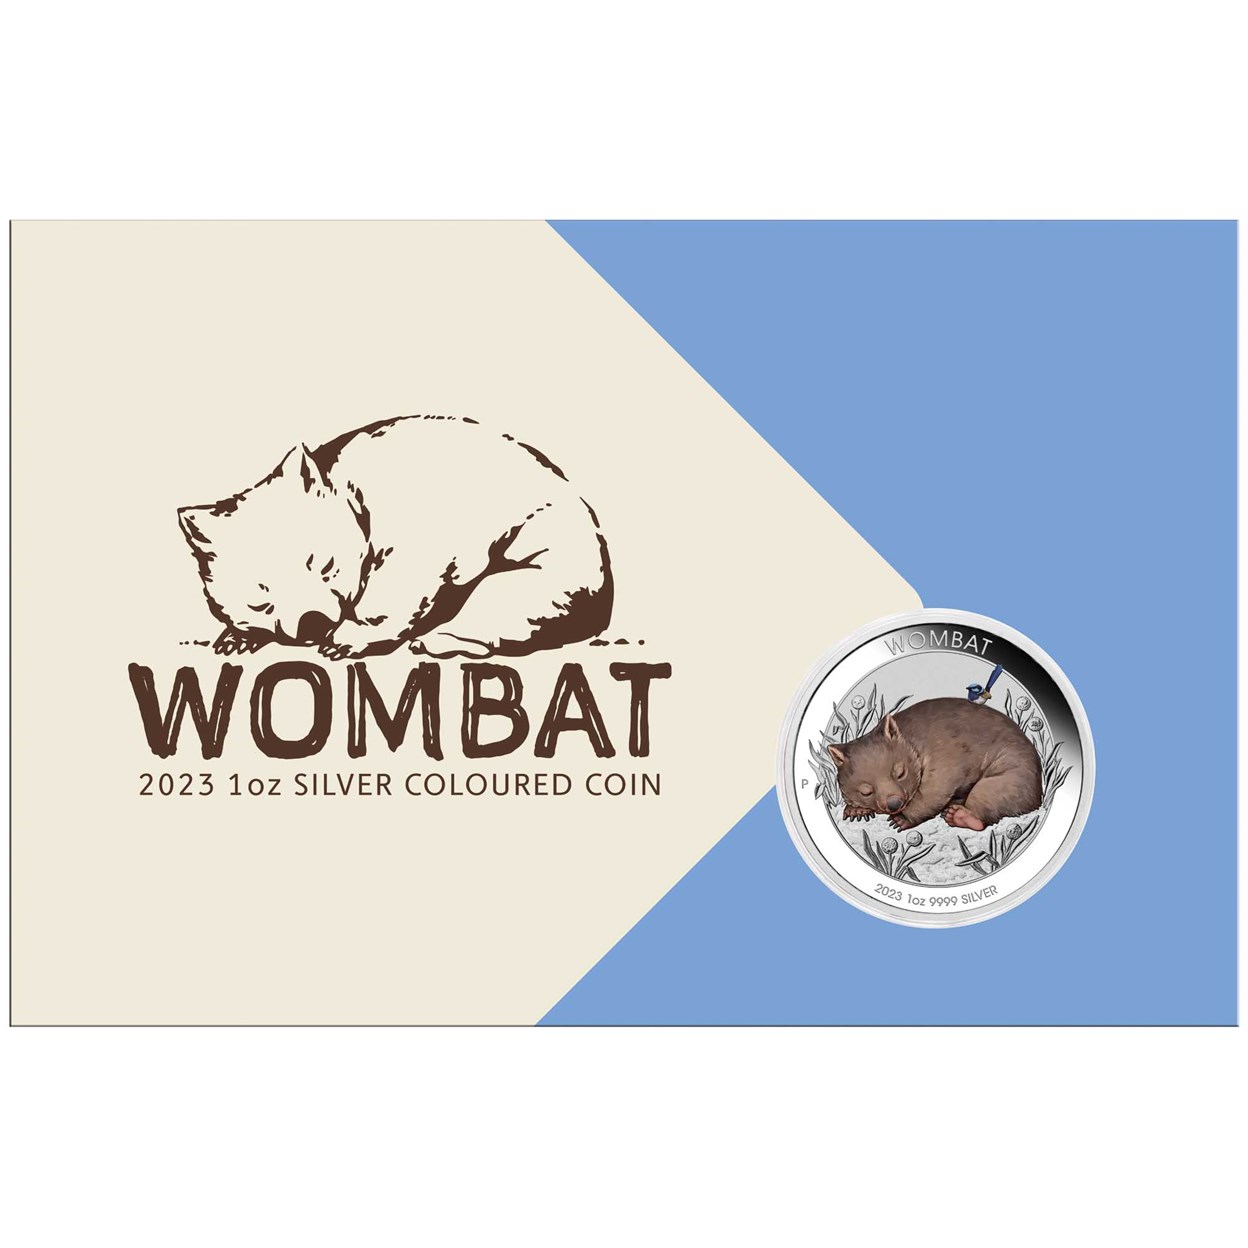 01 Wombat 2023 1oz Silver Coloured Coin InCard HighRes